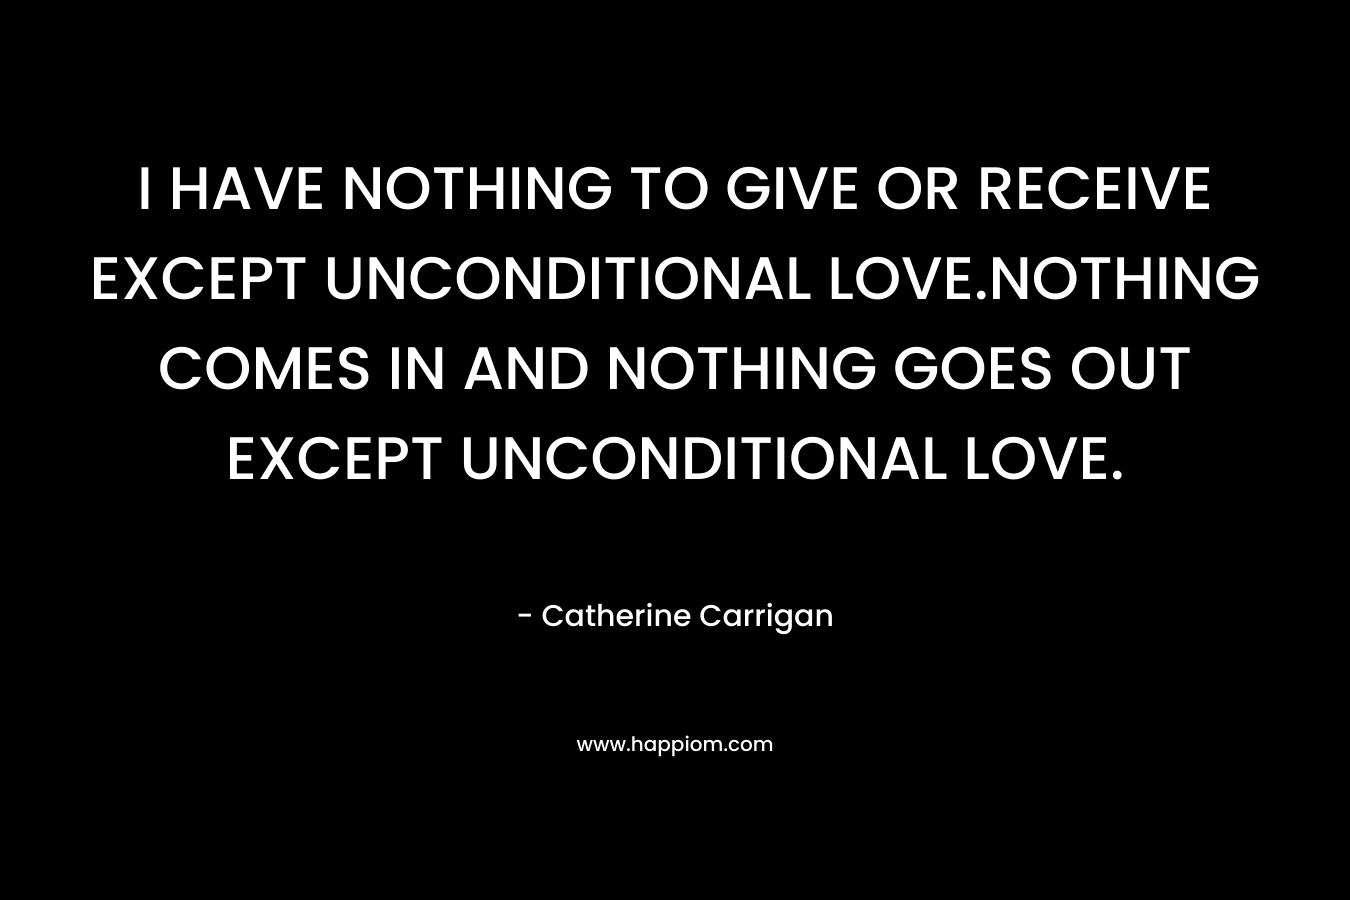 I HAVE NOTHING TO GIVE OR RECEIVE EXCEPT UNCONDITIONAL LOVE.NOTHING COMES IN AND NOTHING GOES OUT EXCEPT UNCONDITIONAL LOVE. – Catherine Carrigan